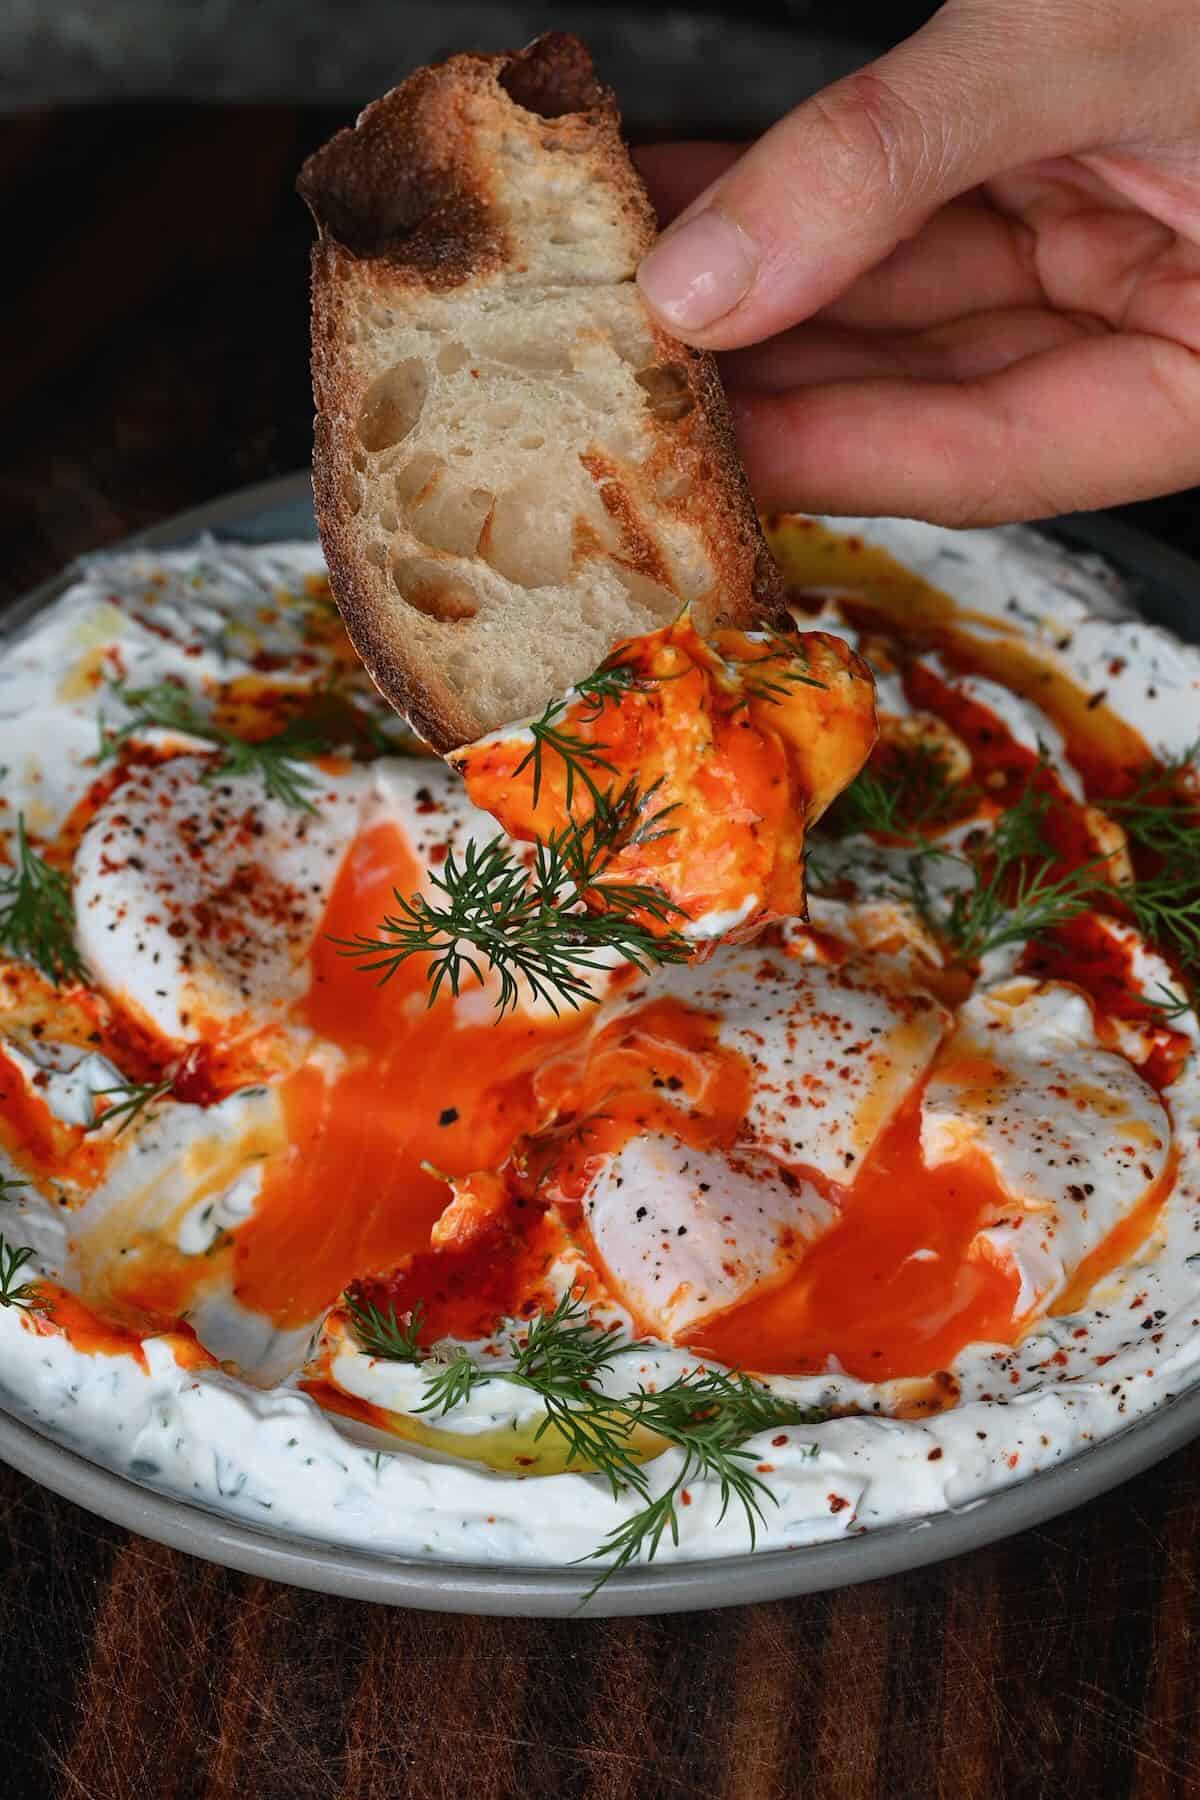 Bread dipped in Turkish eggs topped with dill